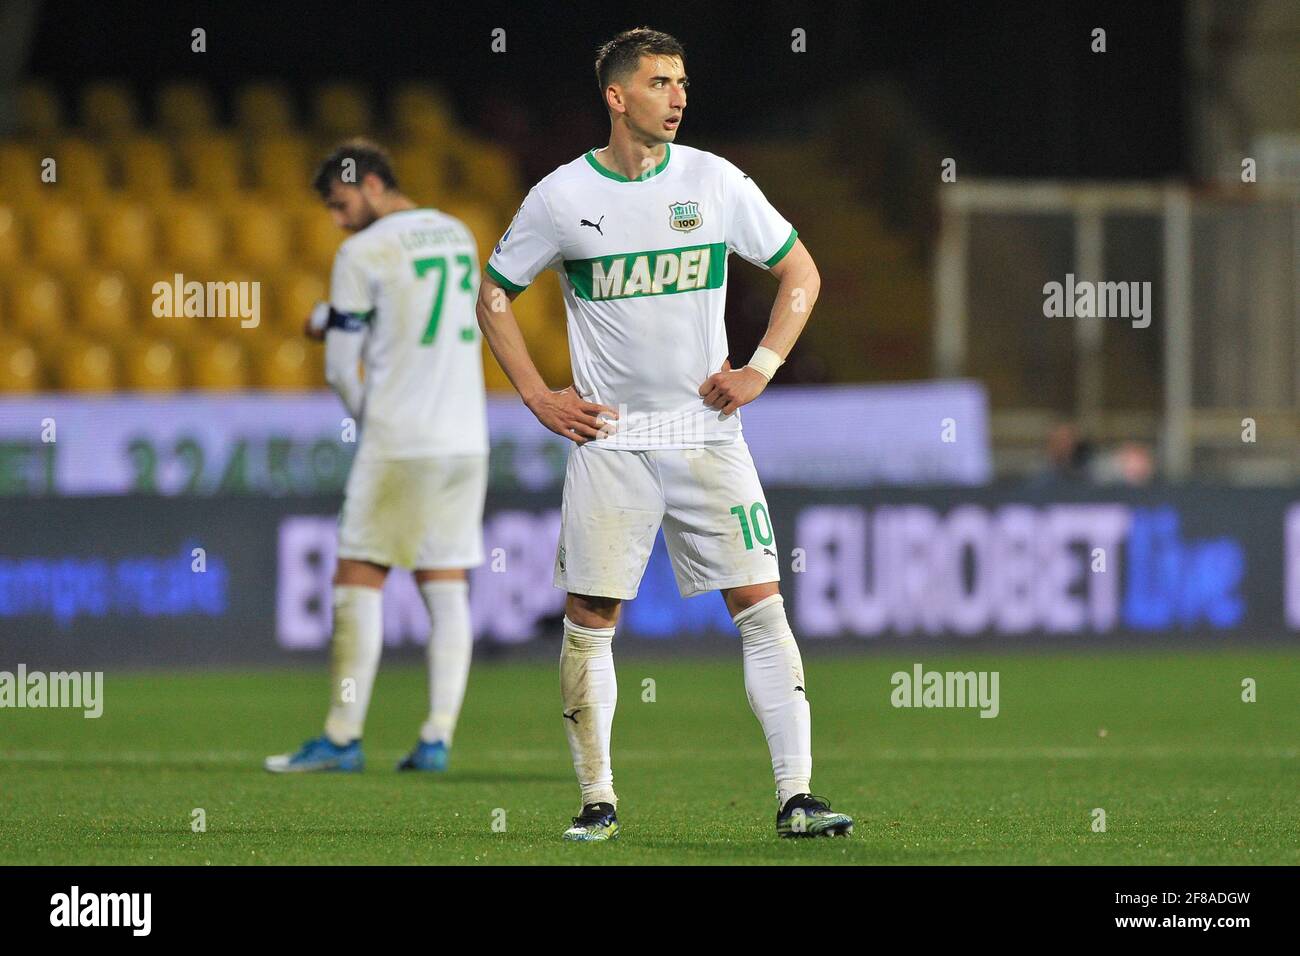 Benevento, Italy. 12th Apr, 2021. Filip Djuricic player of Sassuolo, during the match of the Italian football league Serie A between Benevento vs Sassuolo final result 0-1, match played at the Ciro Vigorito stadium in Benevento. Italy, April 12, 2021. (Photo by Vincenzo Izzo/Sipa USA) Credit: Sipa USA/Alamy Live News Stock Photo